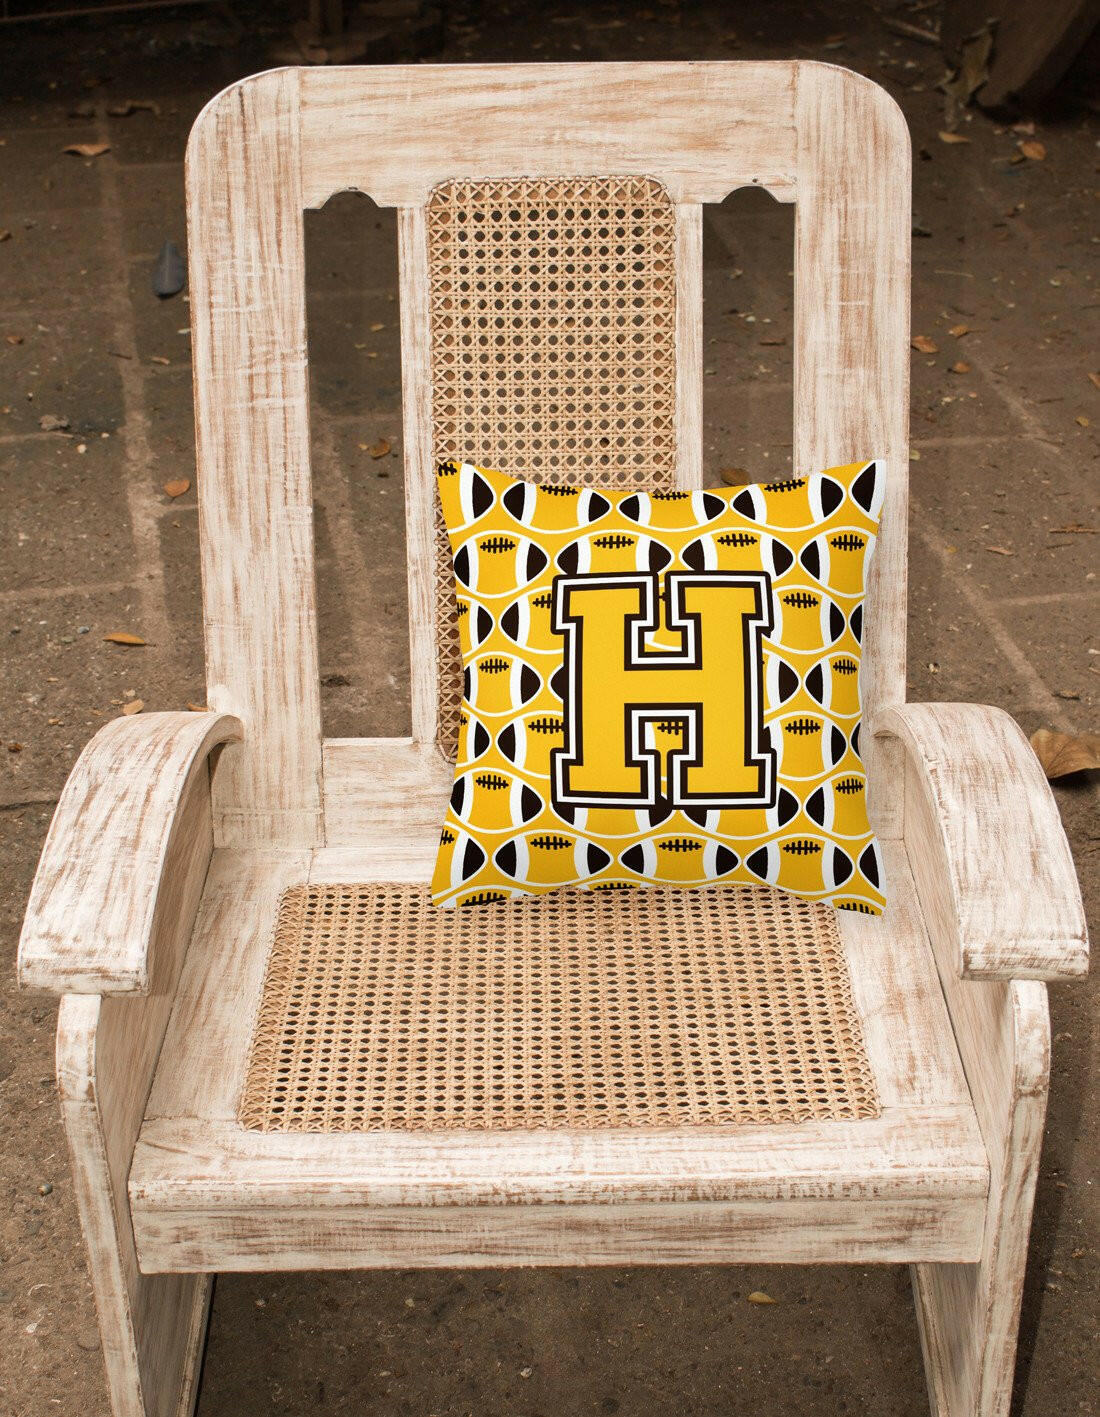 Letter H Football Black, Old Gold and White Fabric Decorative Pillow CJ1080-HPW1414 by Caroline's Treasures